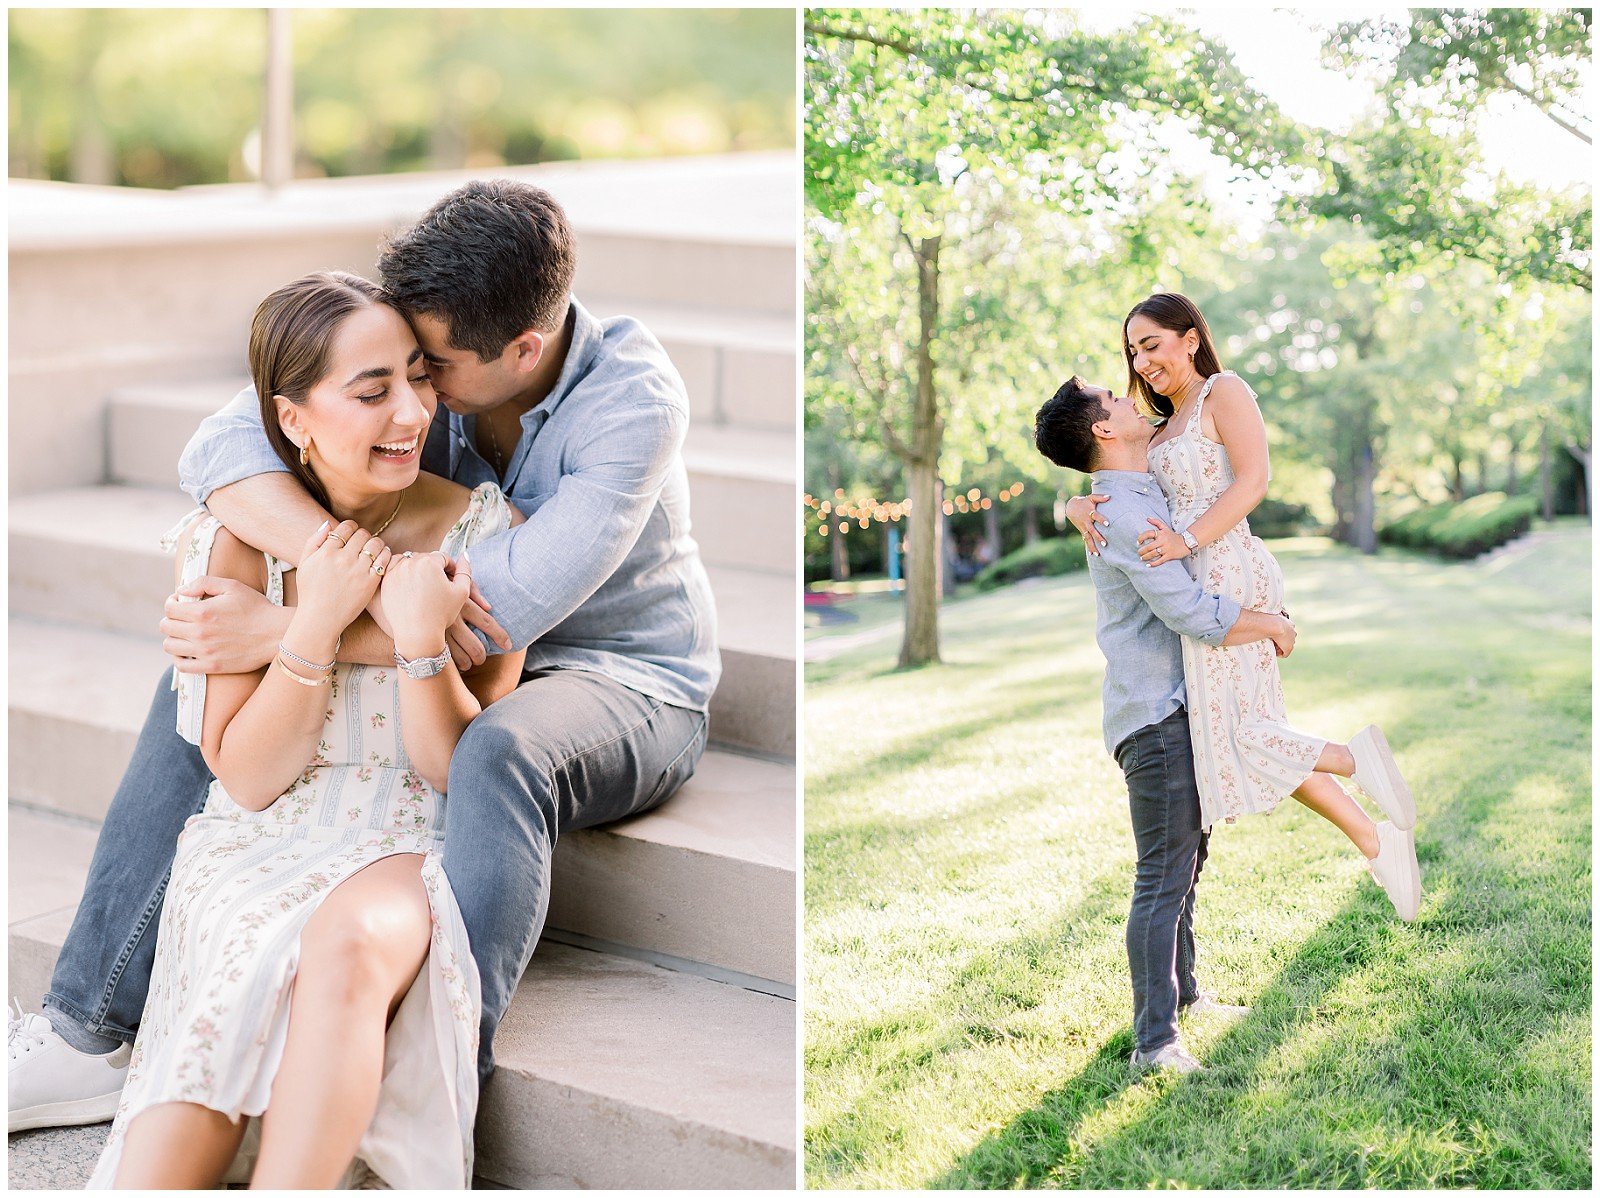 Summer-Engagement-Photos-at-The-Nelson-Atkins-K+S-0522-Elizabeth-Ladean-Photography-photo-_6486.jpg